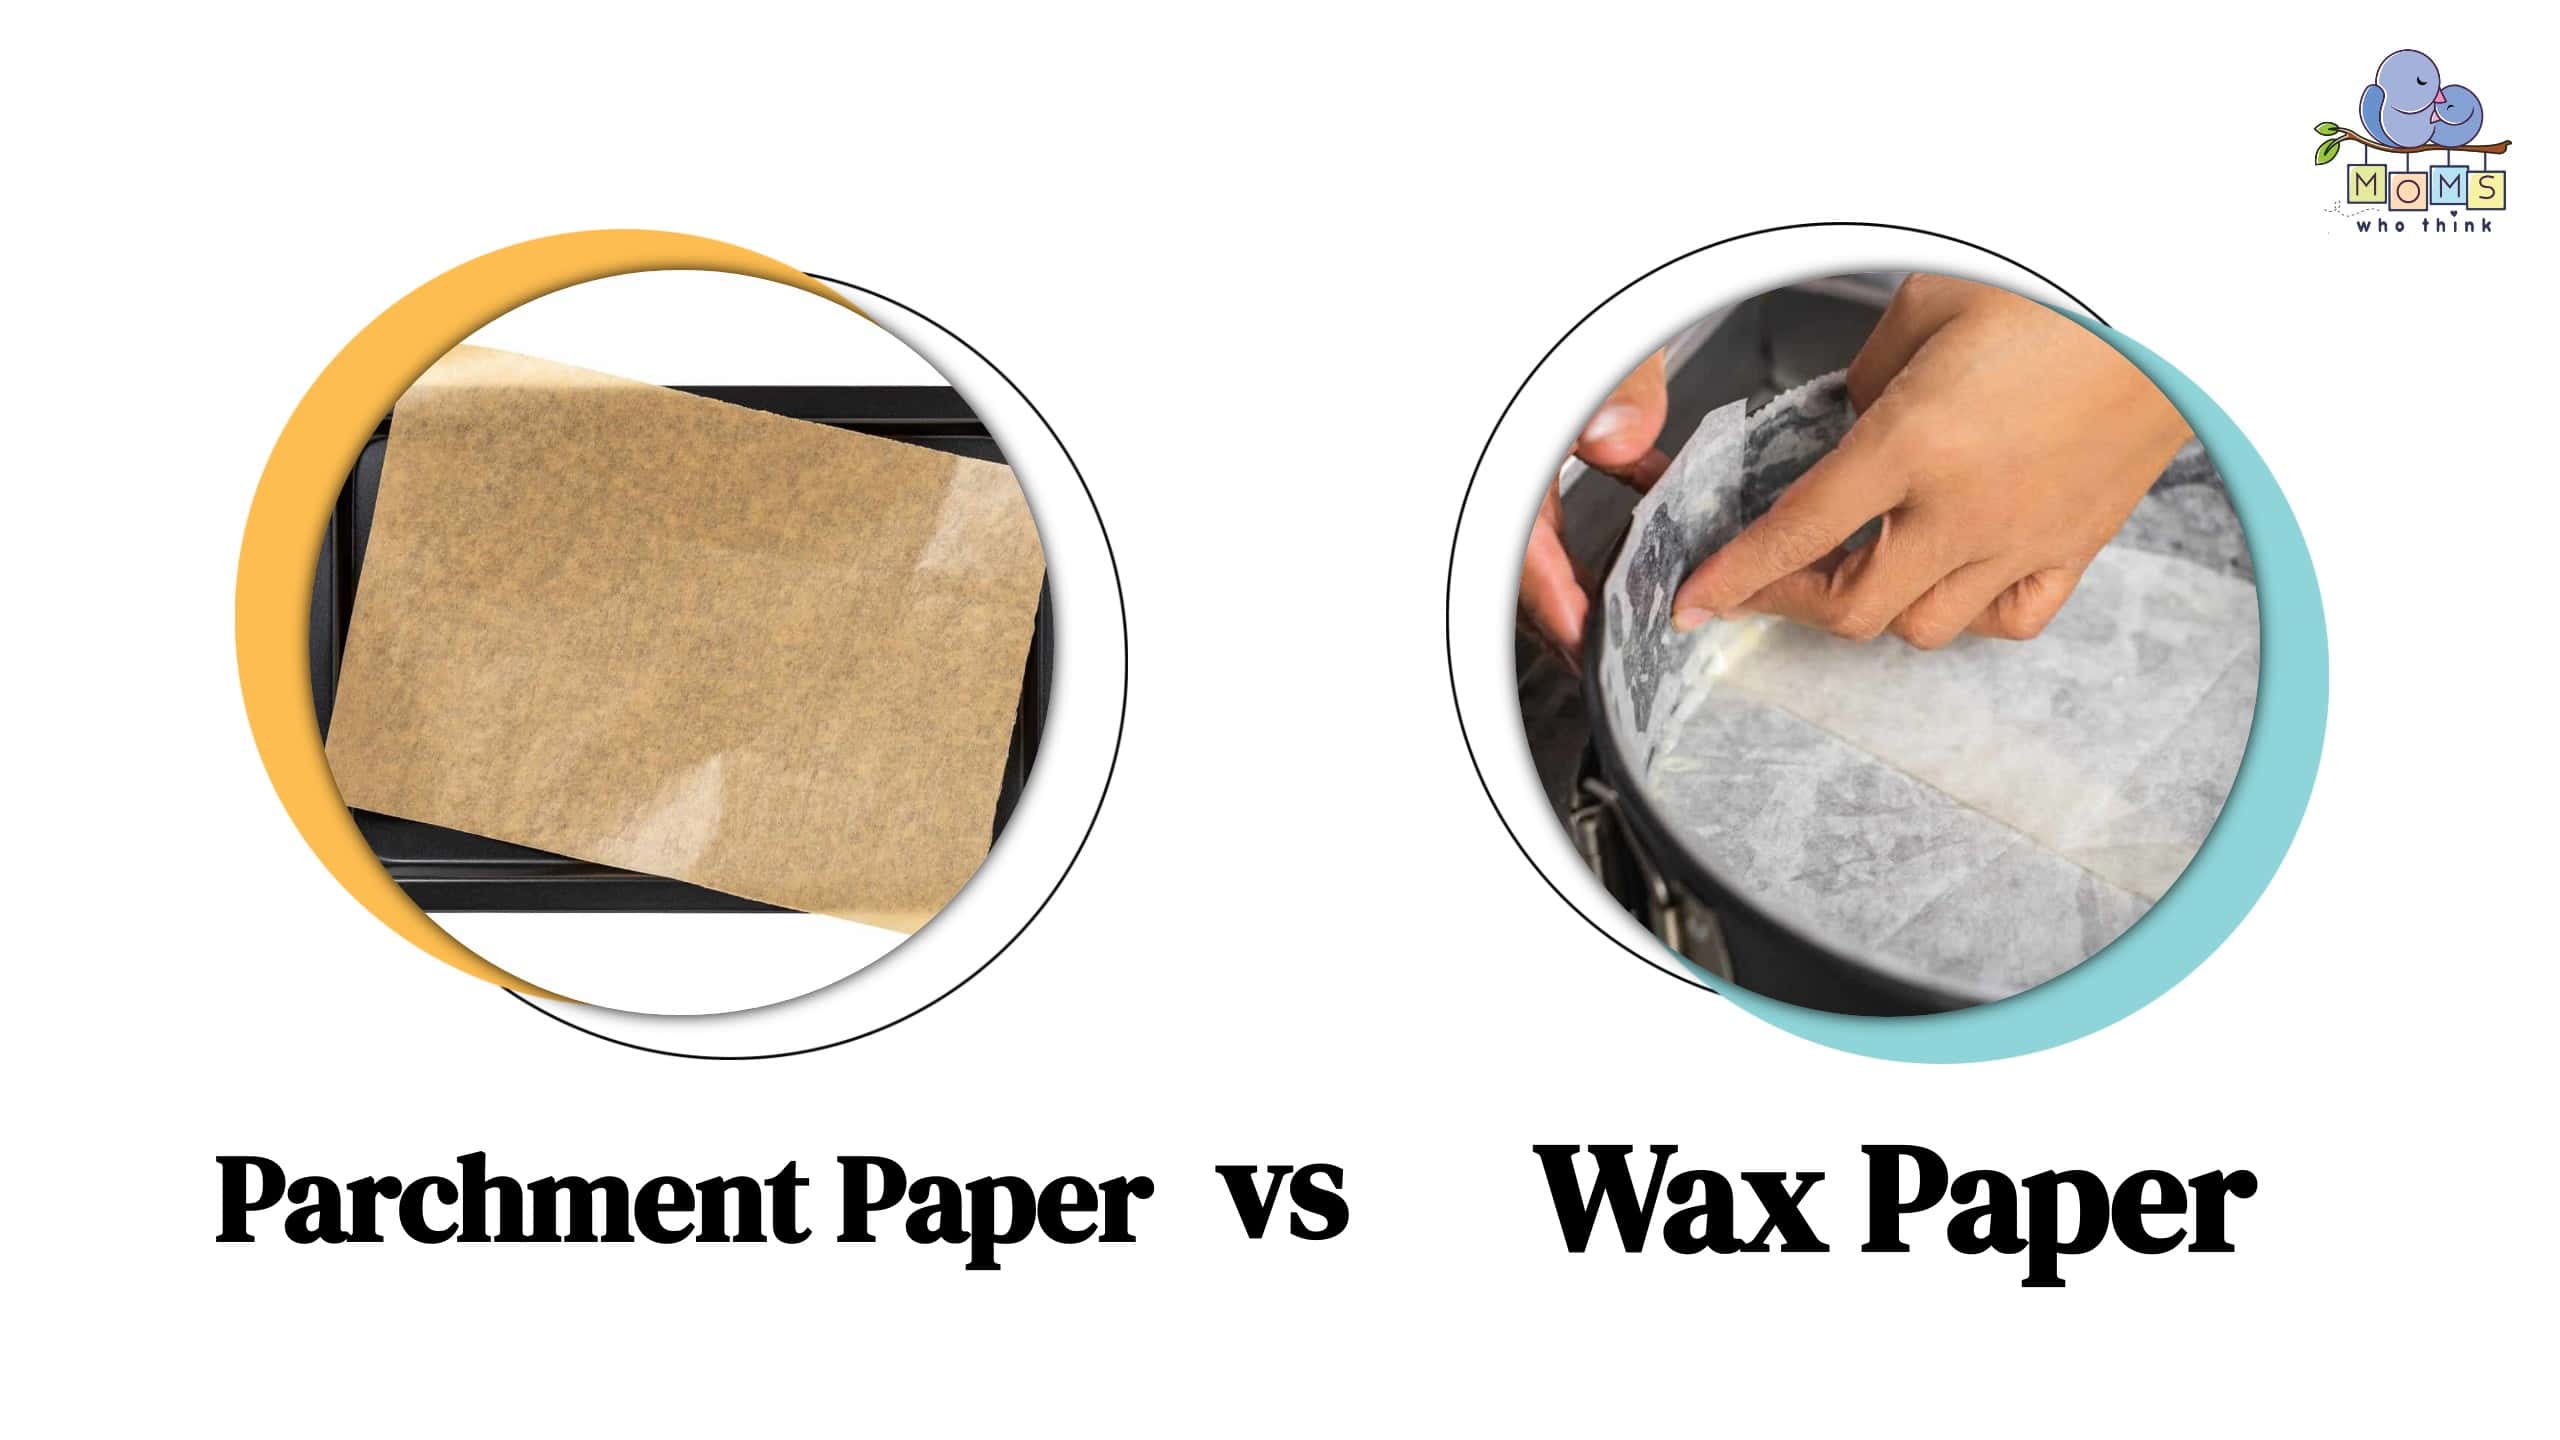 Can You Put Wax Paper in the Oven?